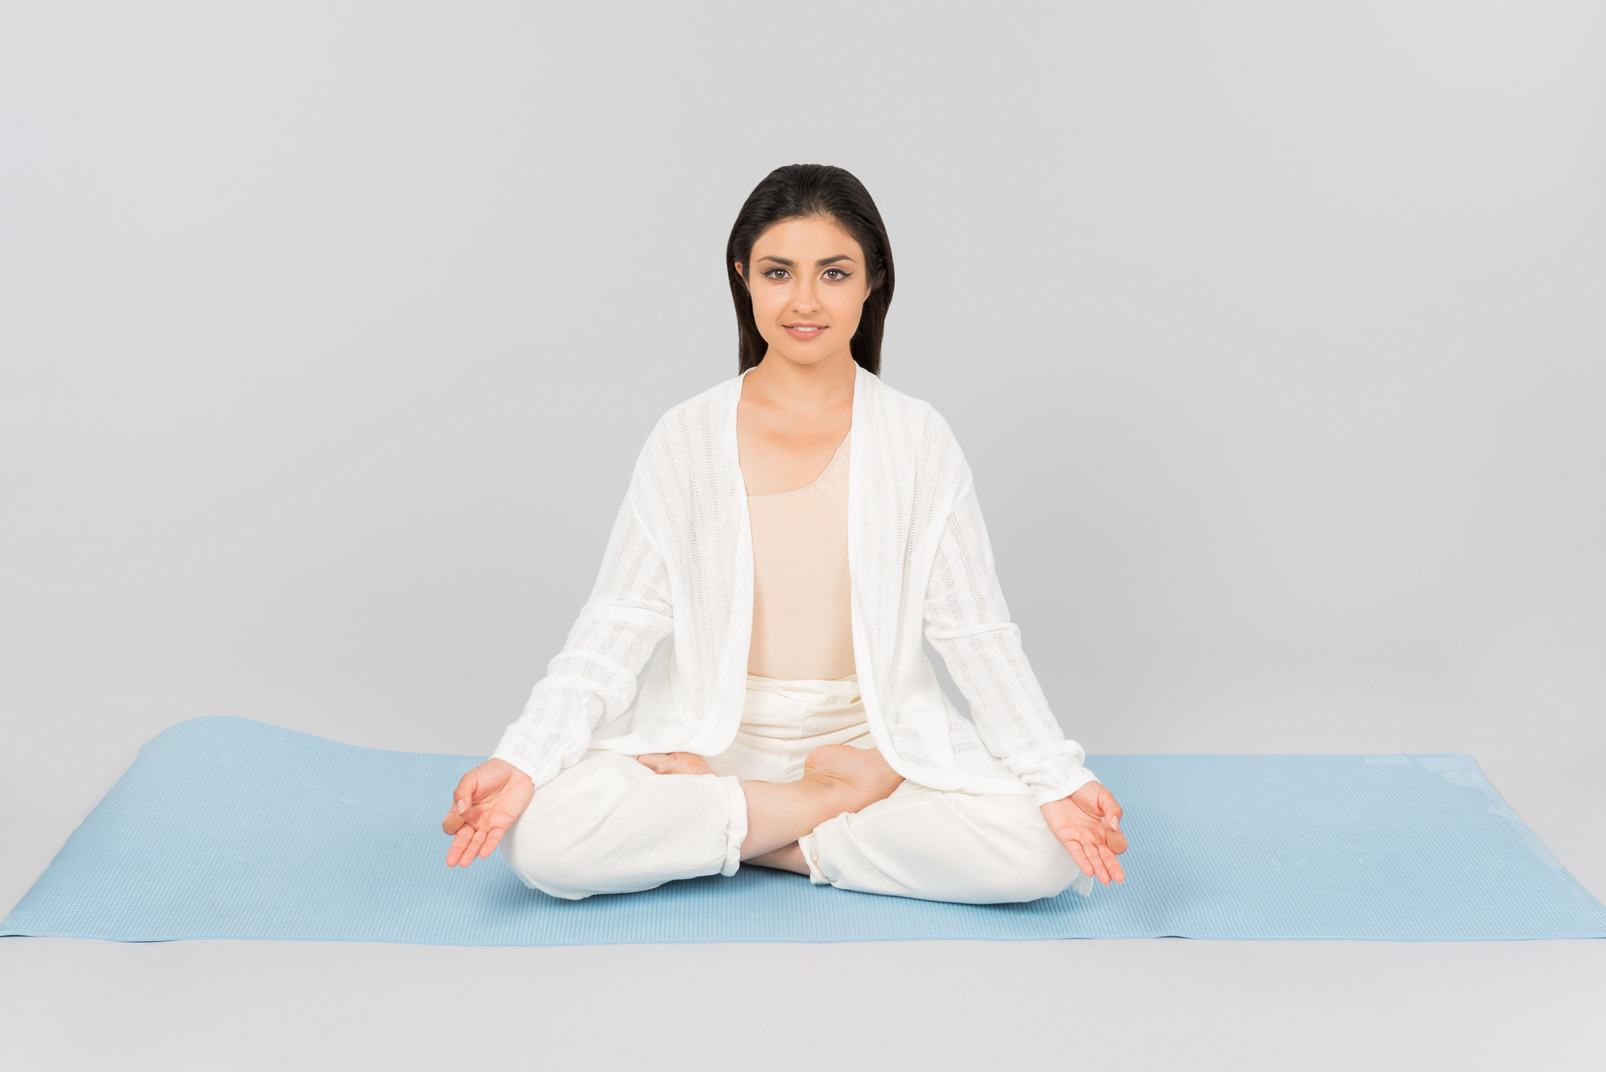 Indian woman sitting with legs crossed on yoga mat